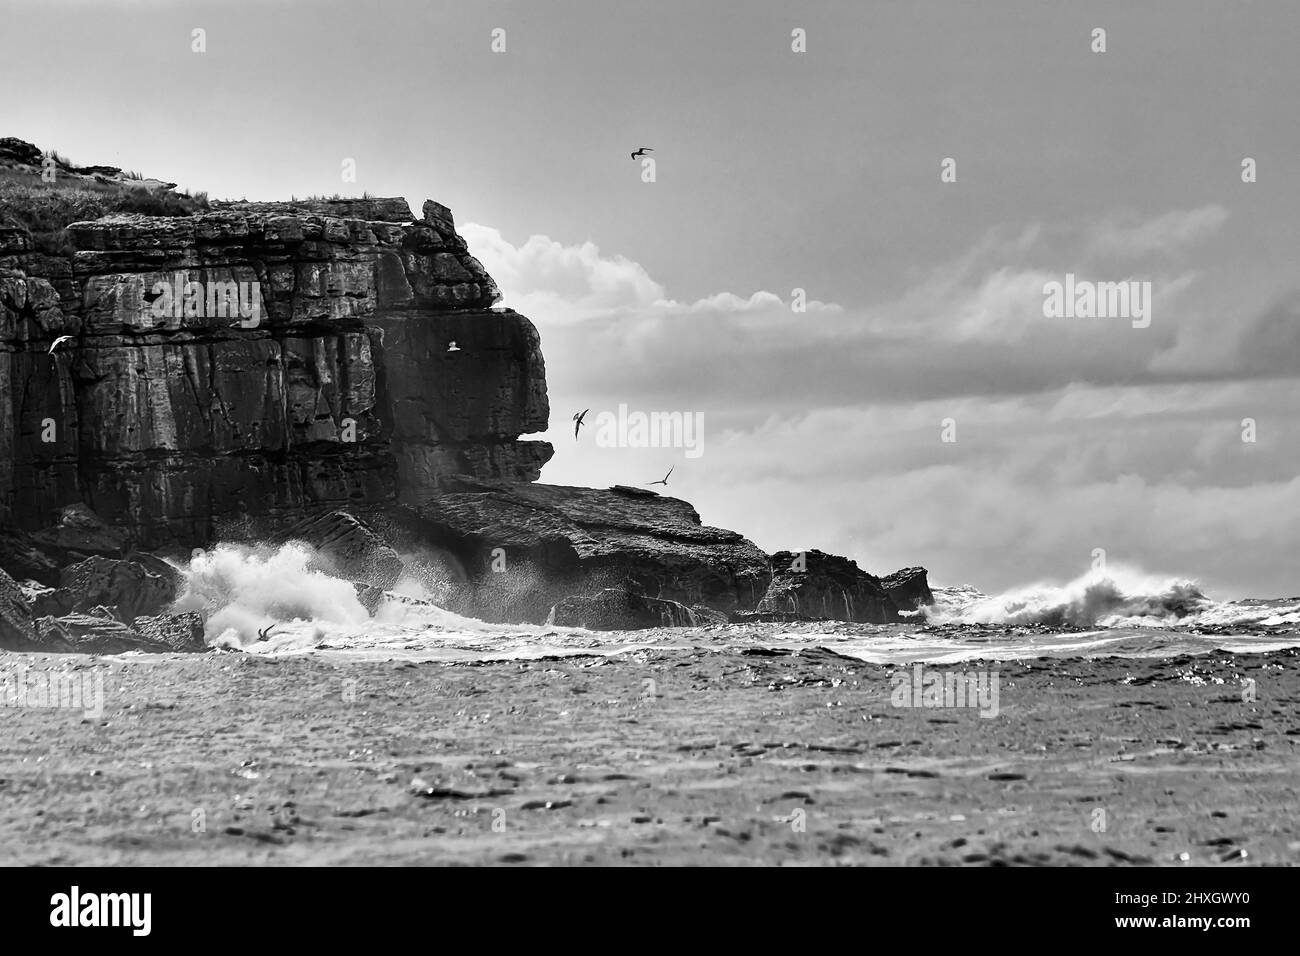 Cliffy edge of Bowen island rocks in high wind and strong waves at high tide - Australian pacific coast seascape. Stock Photo